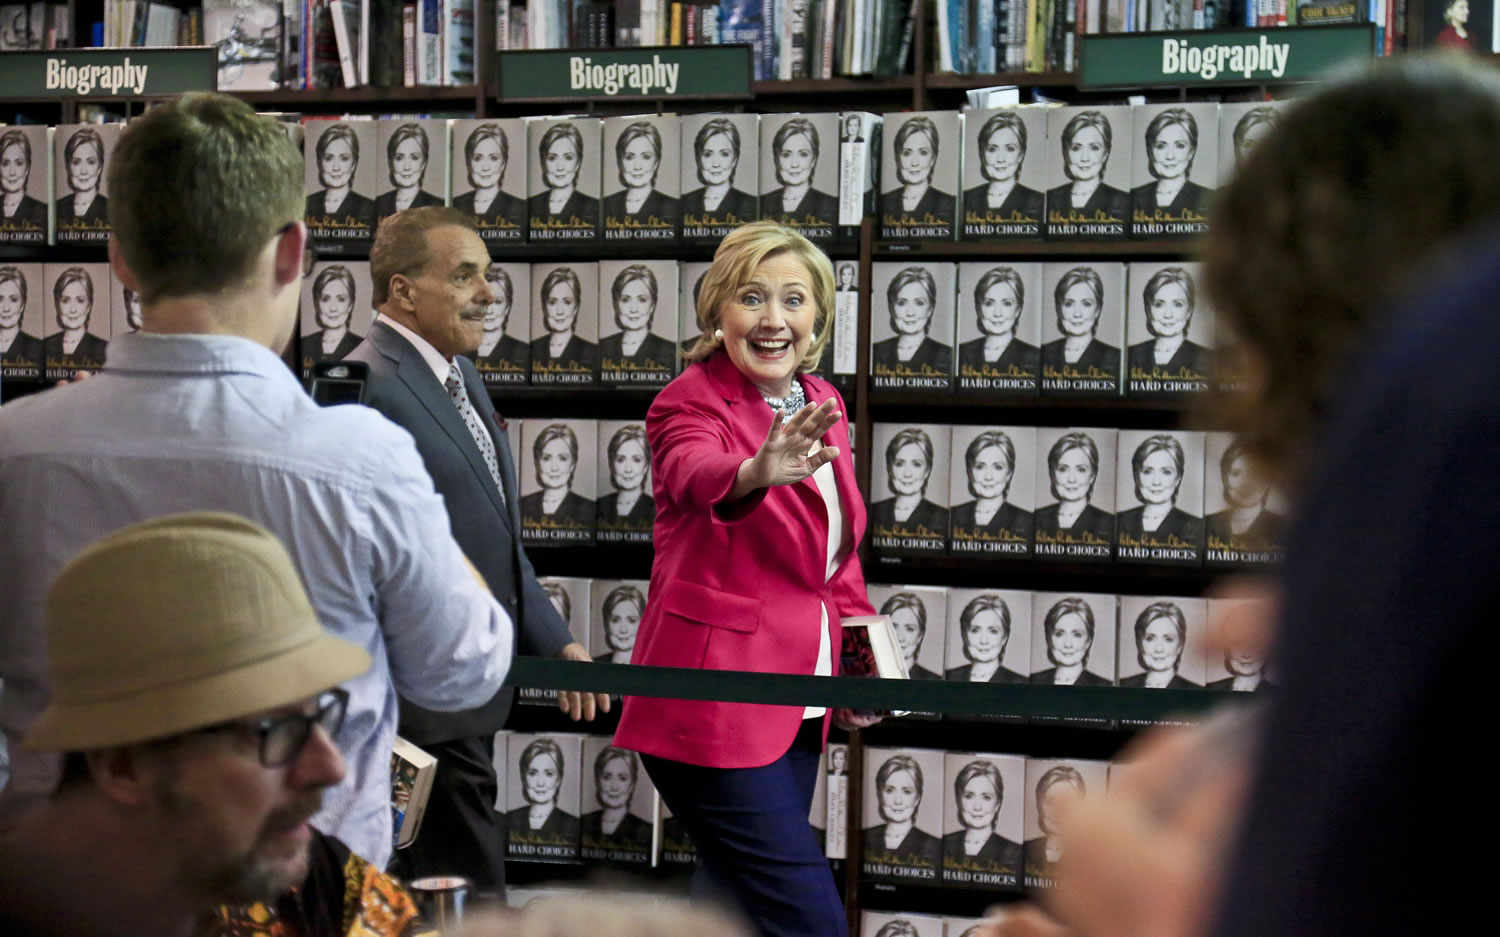 HiIlary Rodham Clinton, center, waves to a gathering as she arrives for a book signing on Tuesday at Barnes and Noble bookstore in New York.